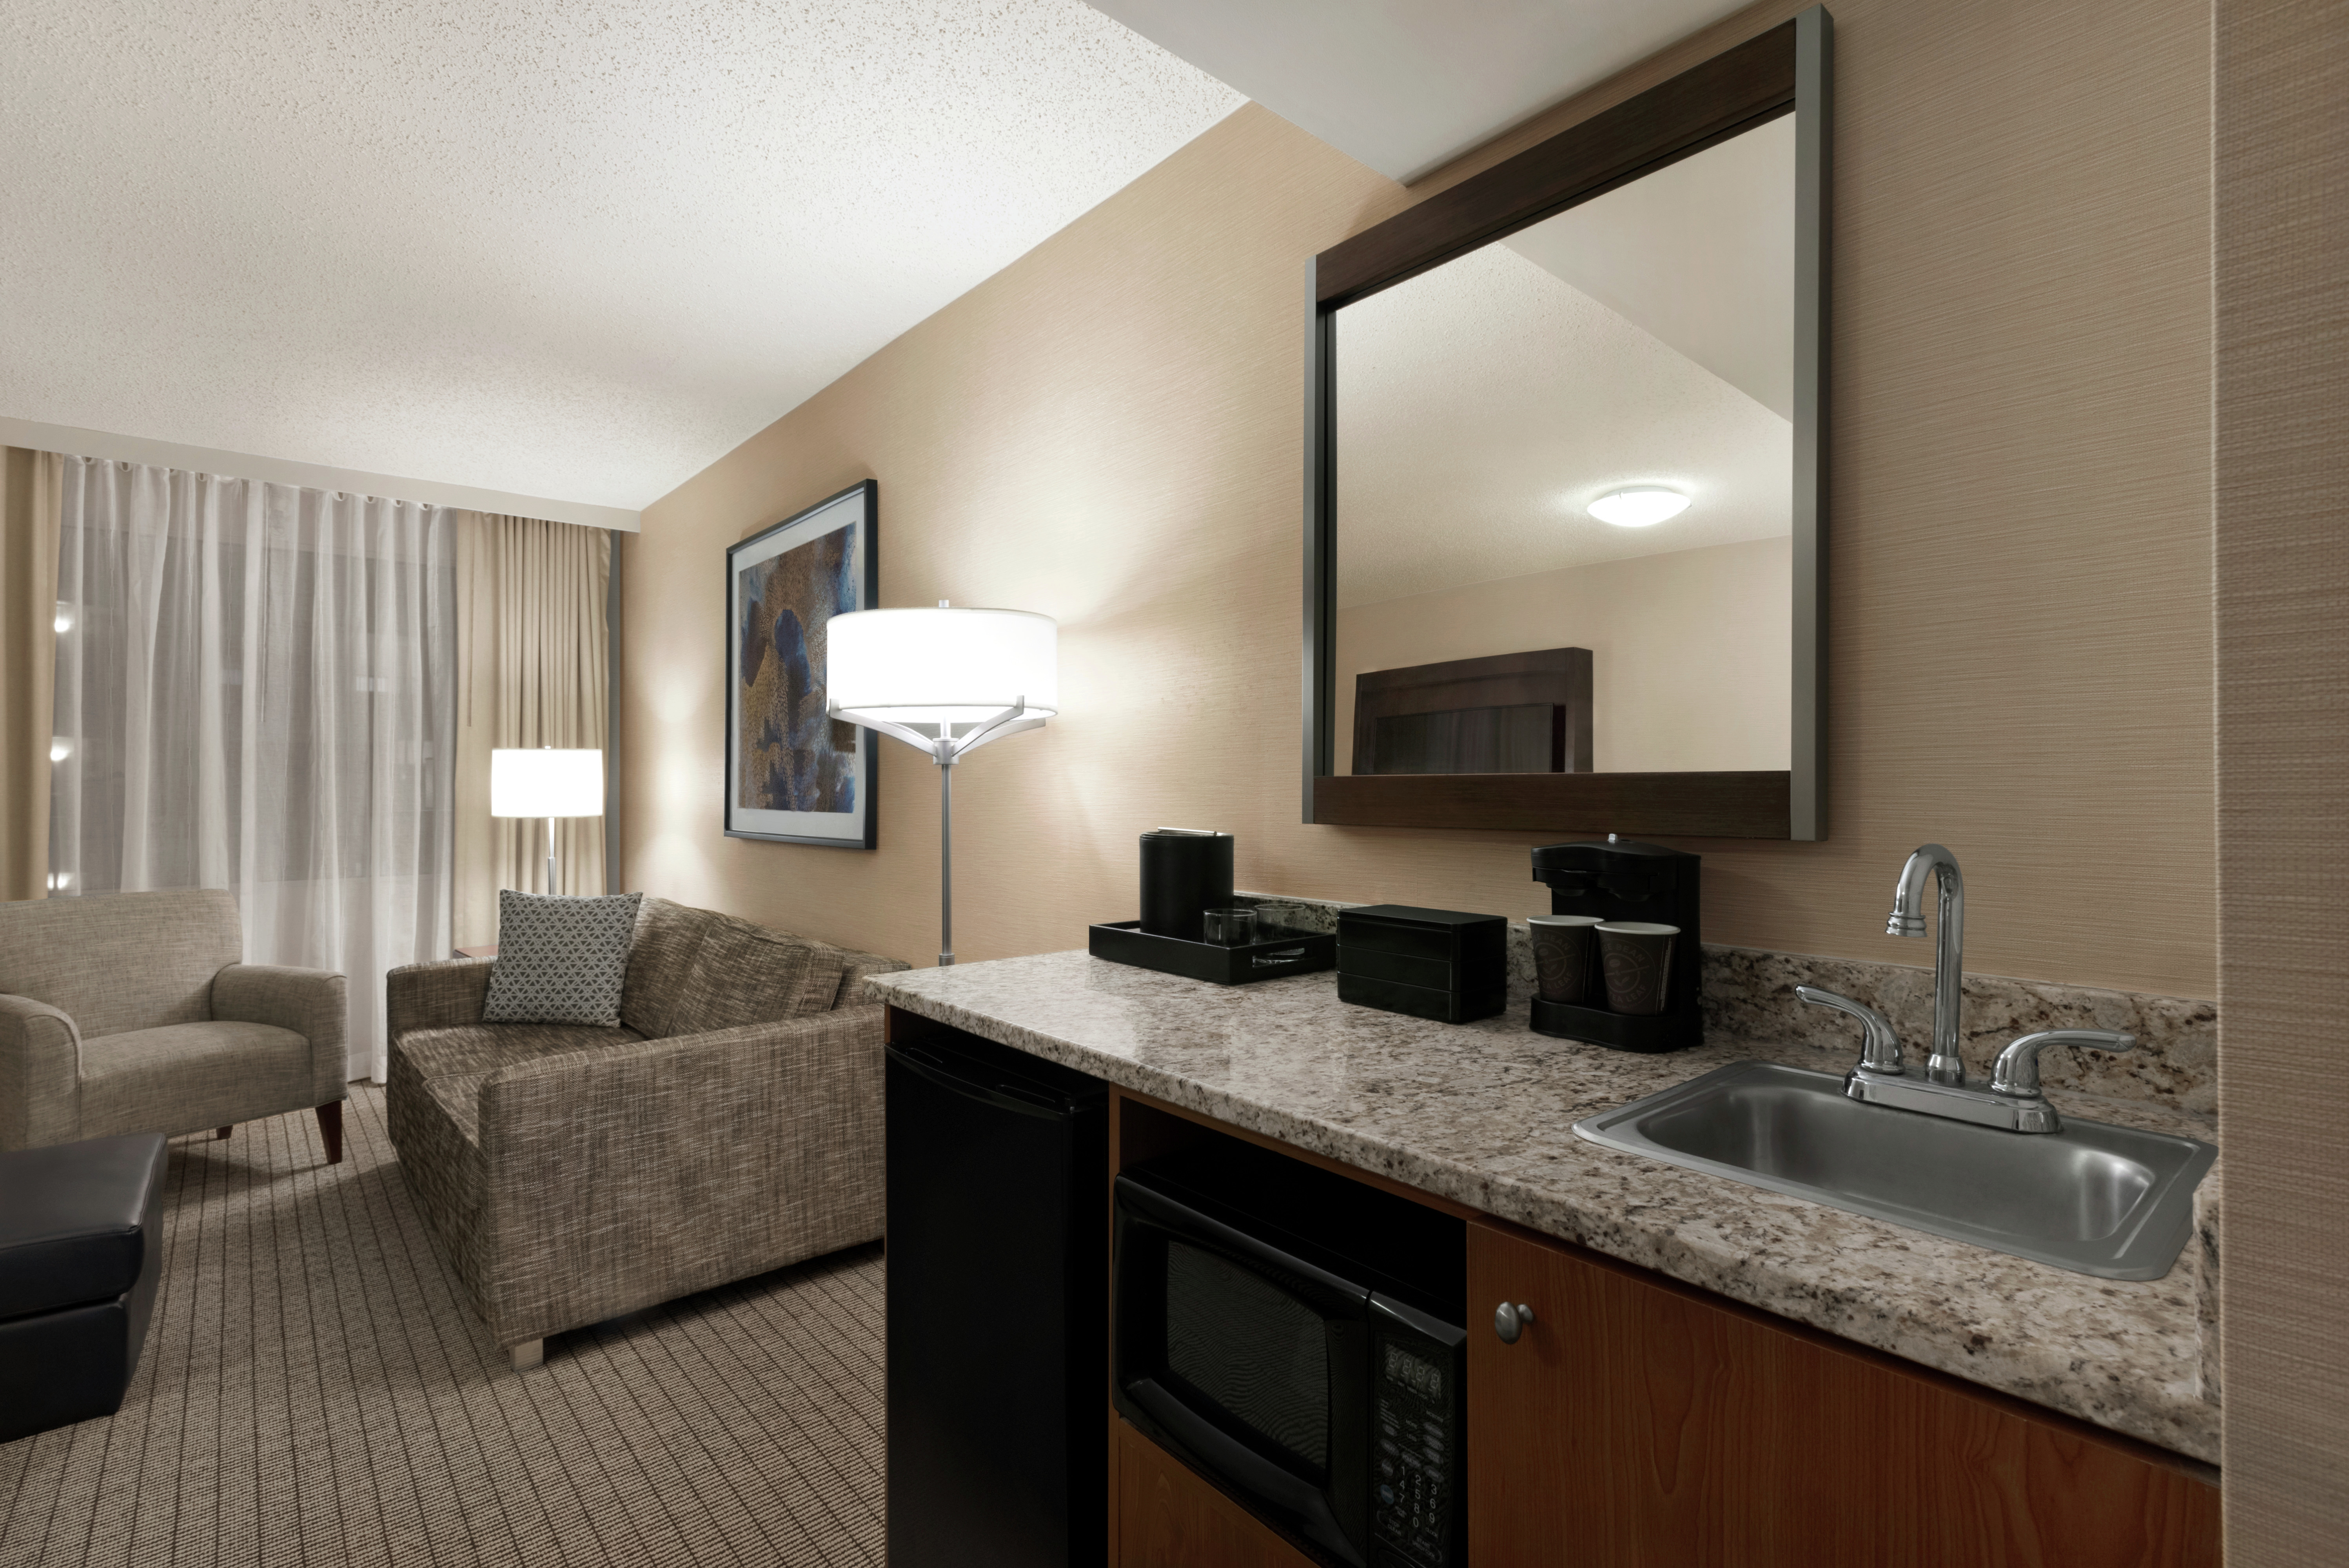 King Suite with Lounge Area, Sink, Mirror, and Room Technology